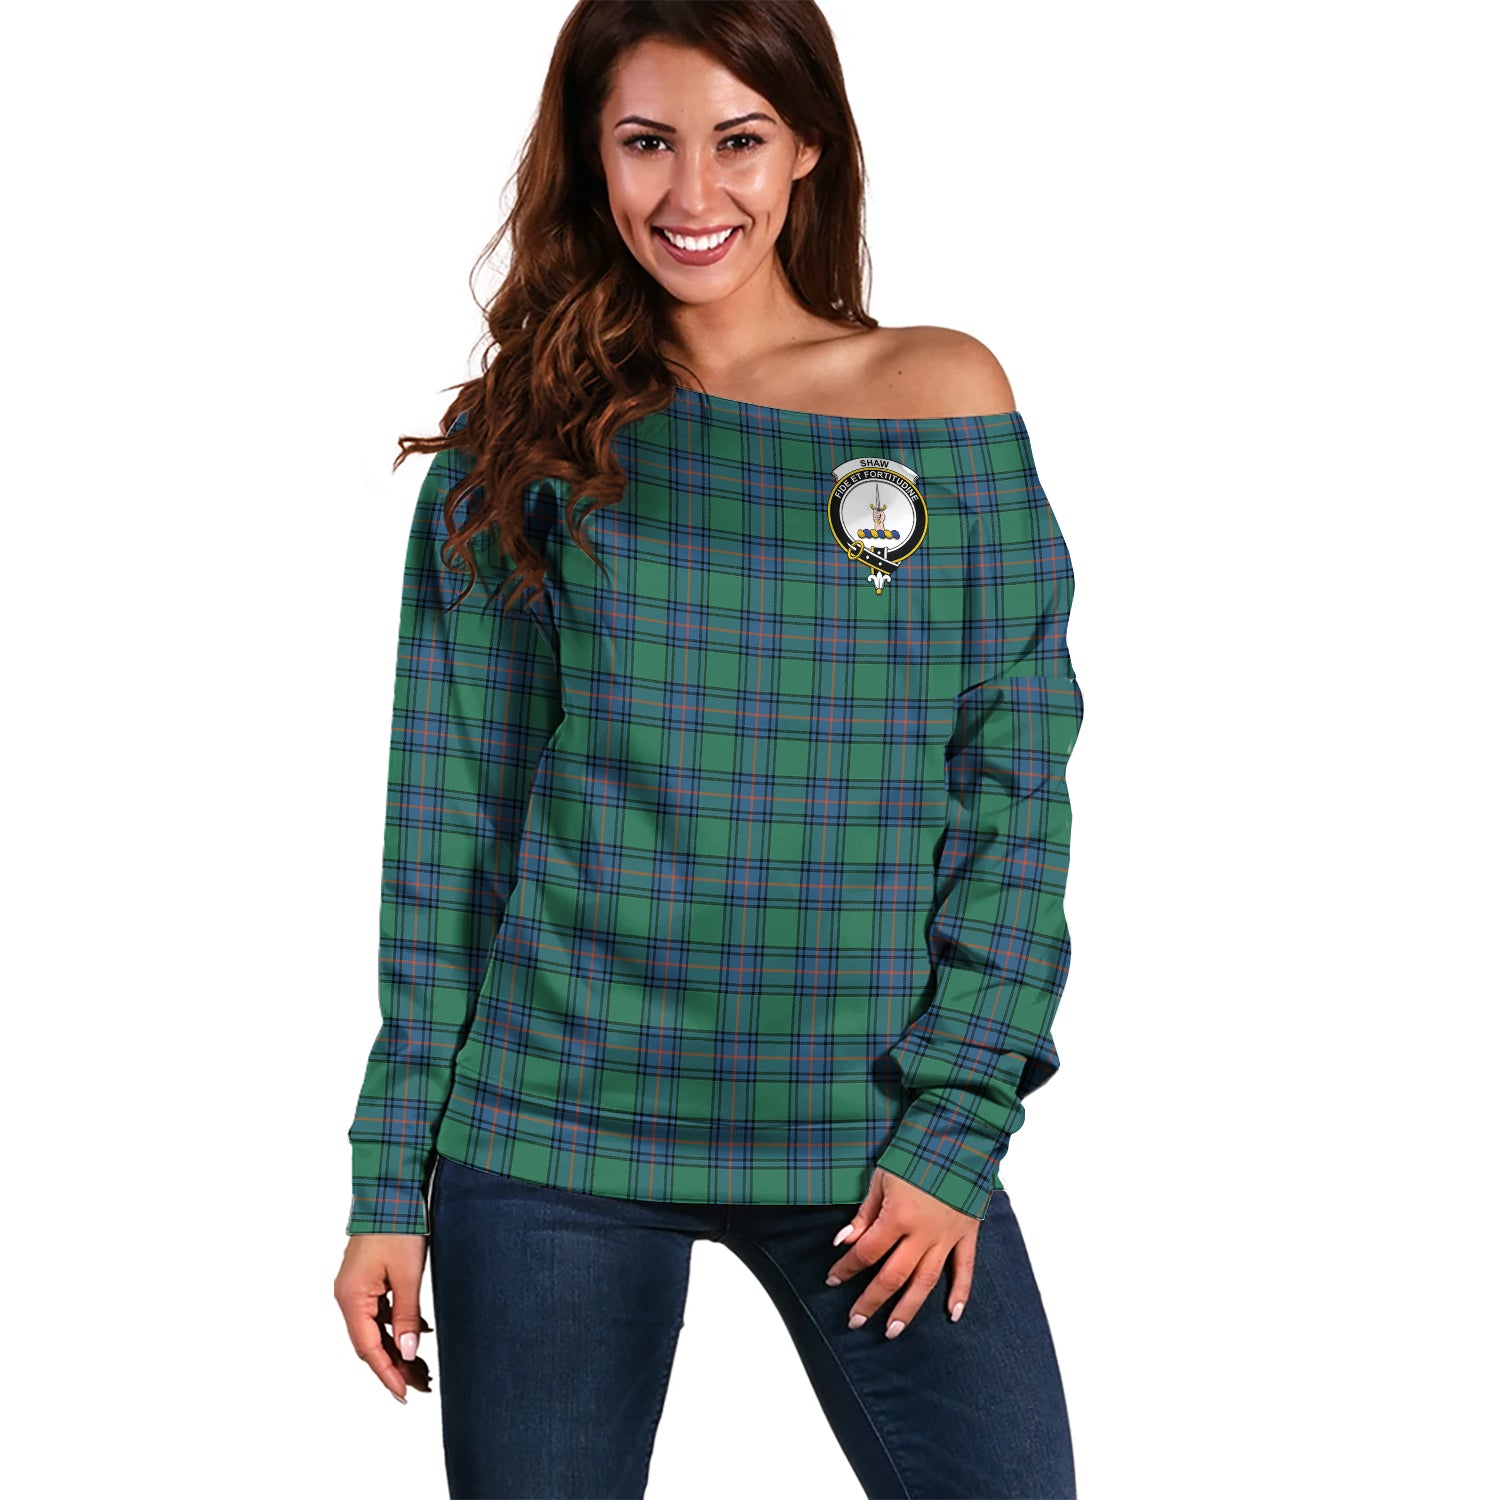 shaw-ancient-clan-tartan-off-shoulder-sweater-family-crest-sweater-for-women